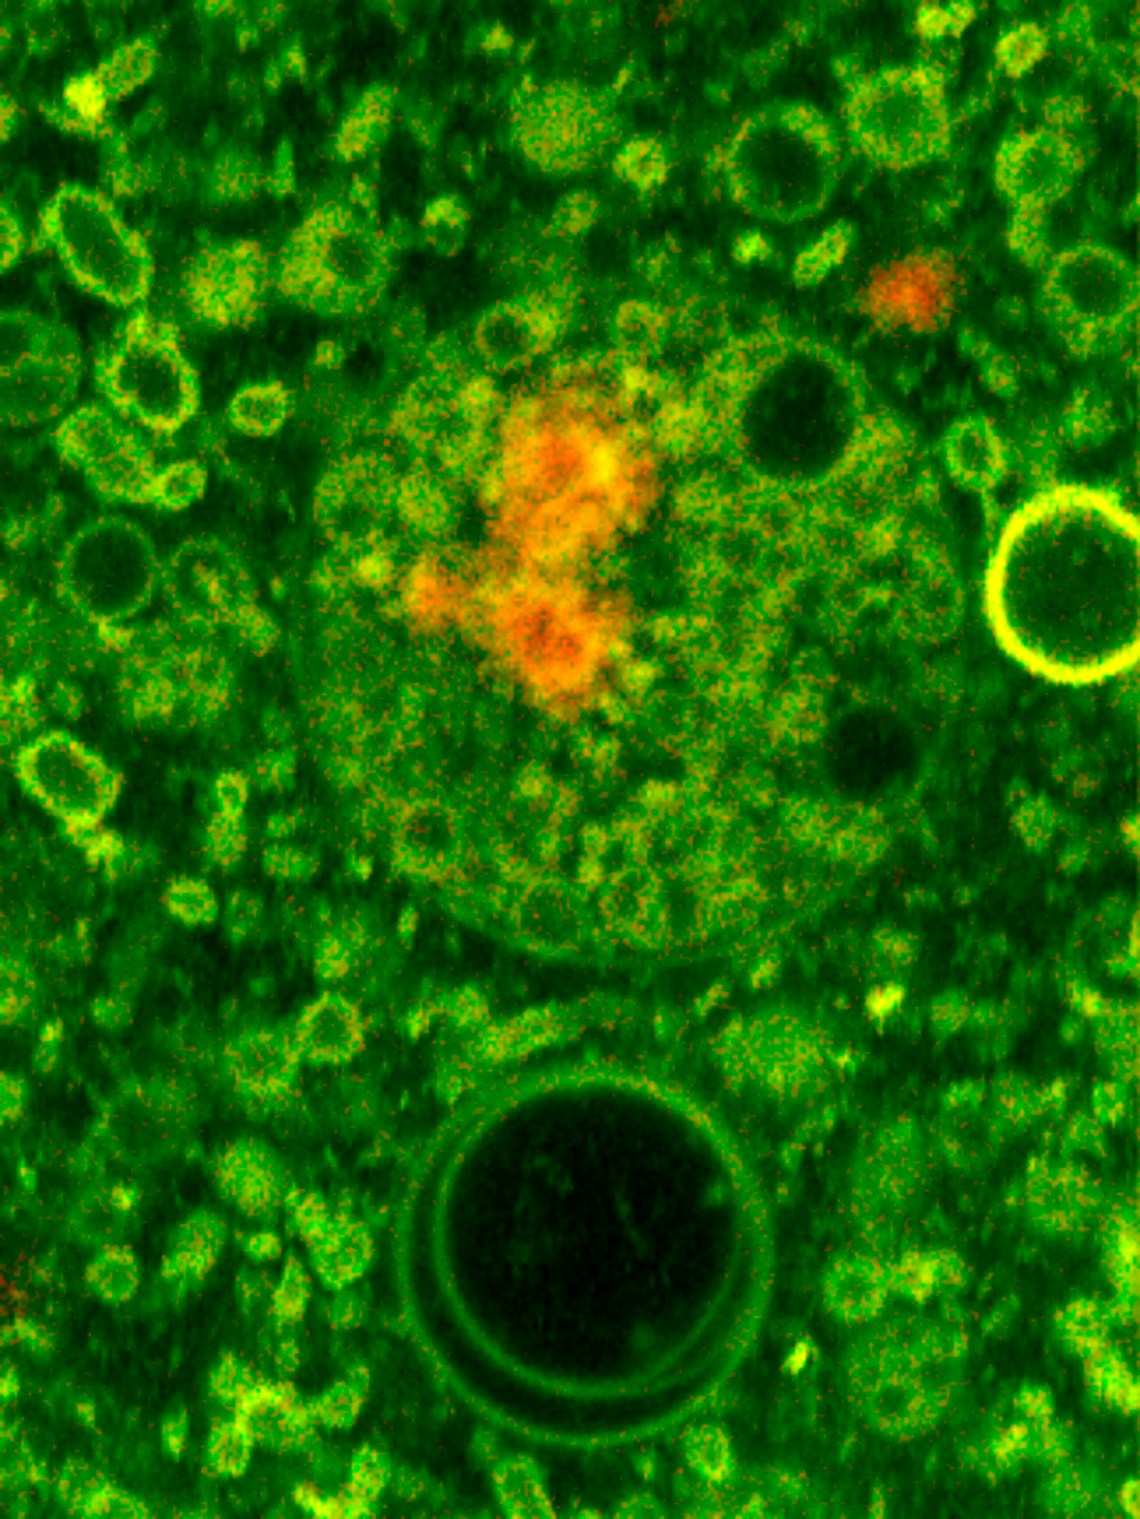 Fatty acid vesicles encapsulating RNA molecules attached to clay; image from an experiment conducted to determine how the first cells may have been formed